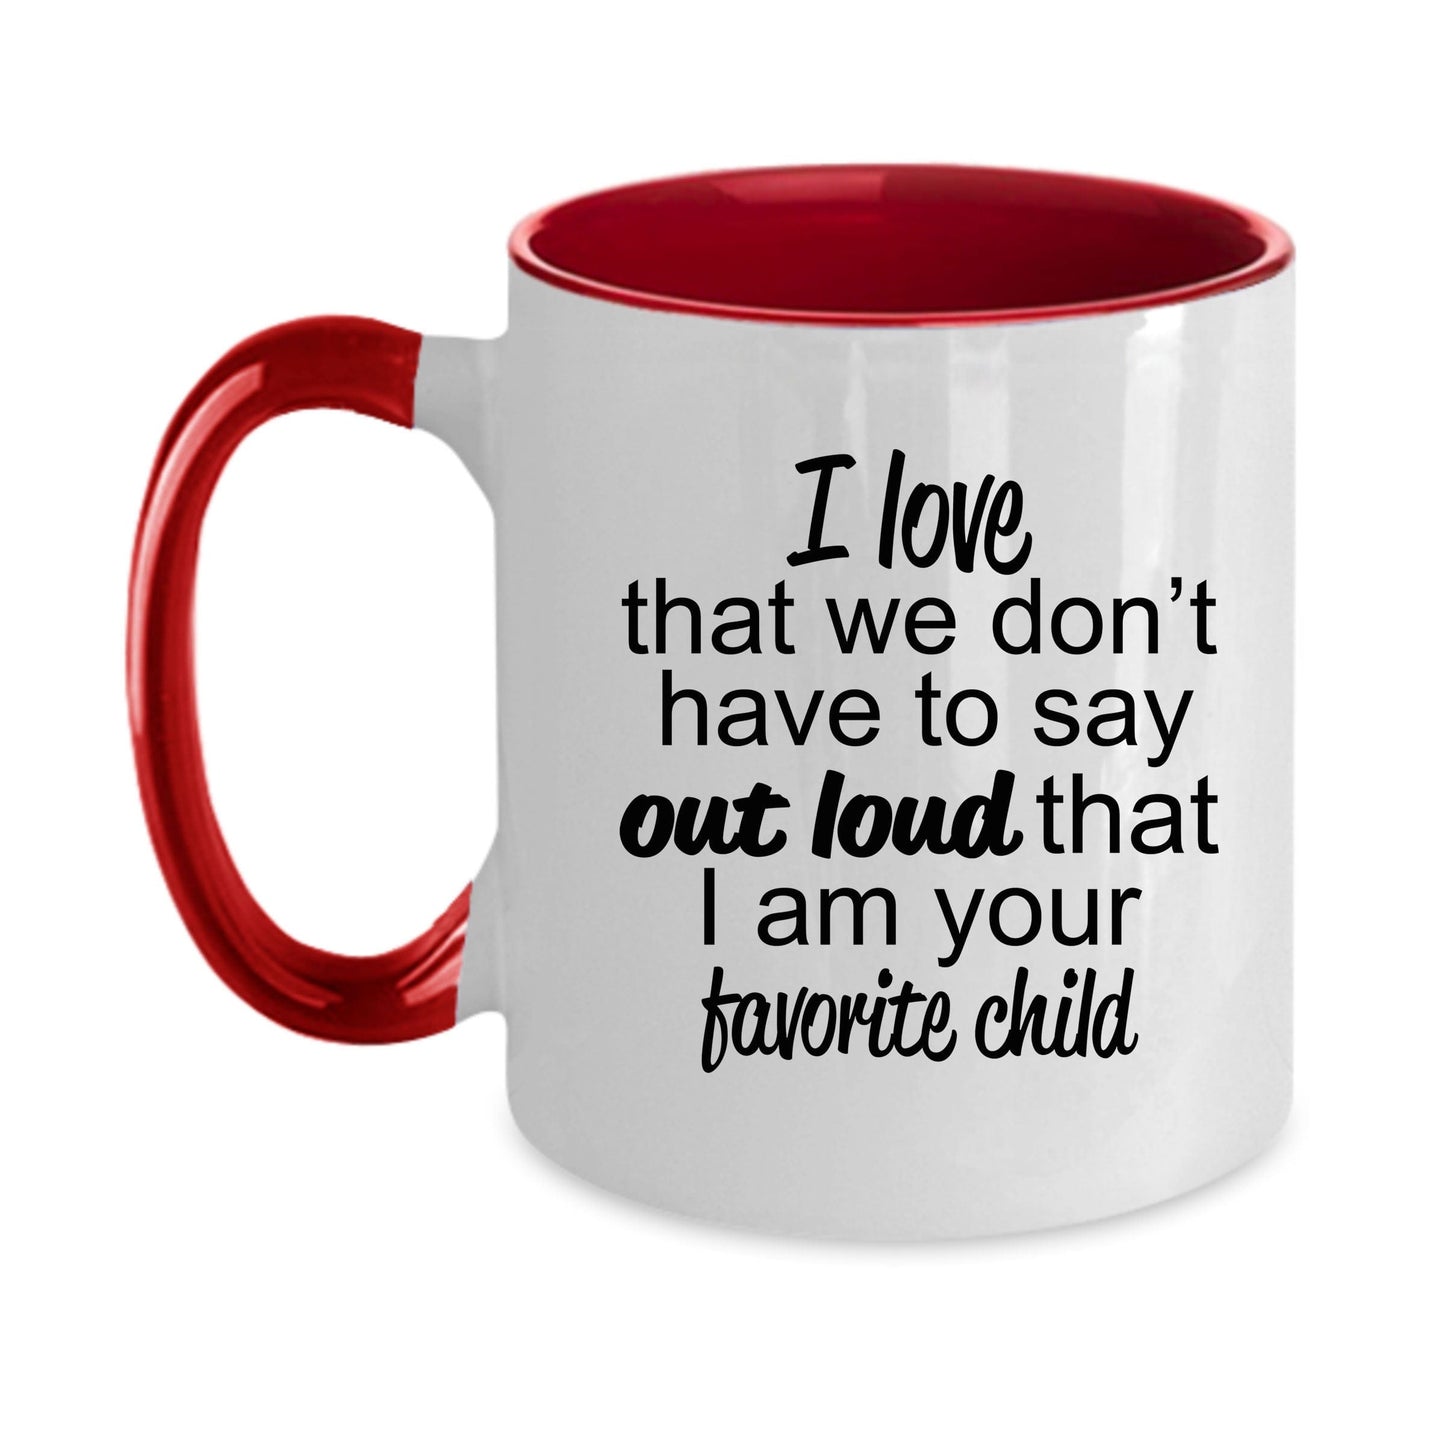 Favorite Child to Mother or Father Mug - Perfect Gift for Mother's Day or Father's Day